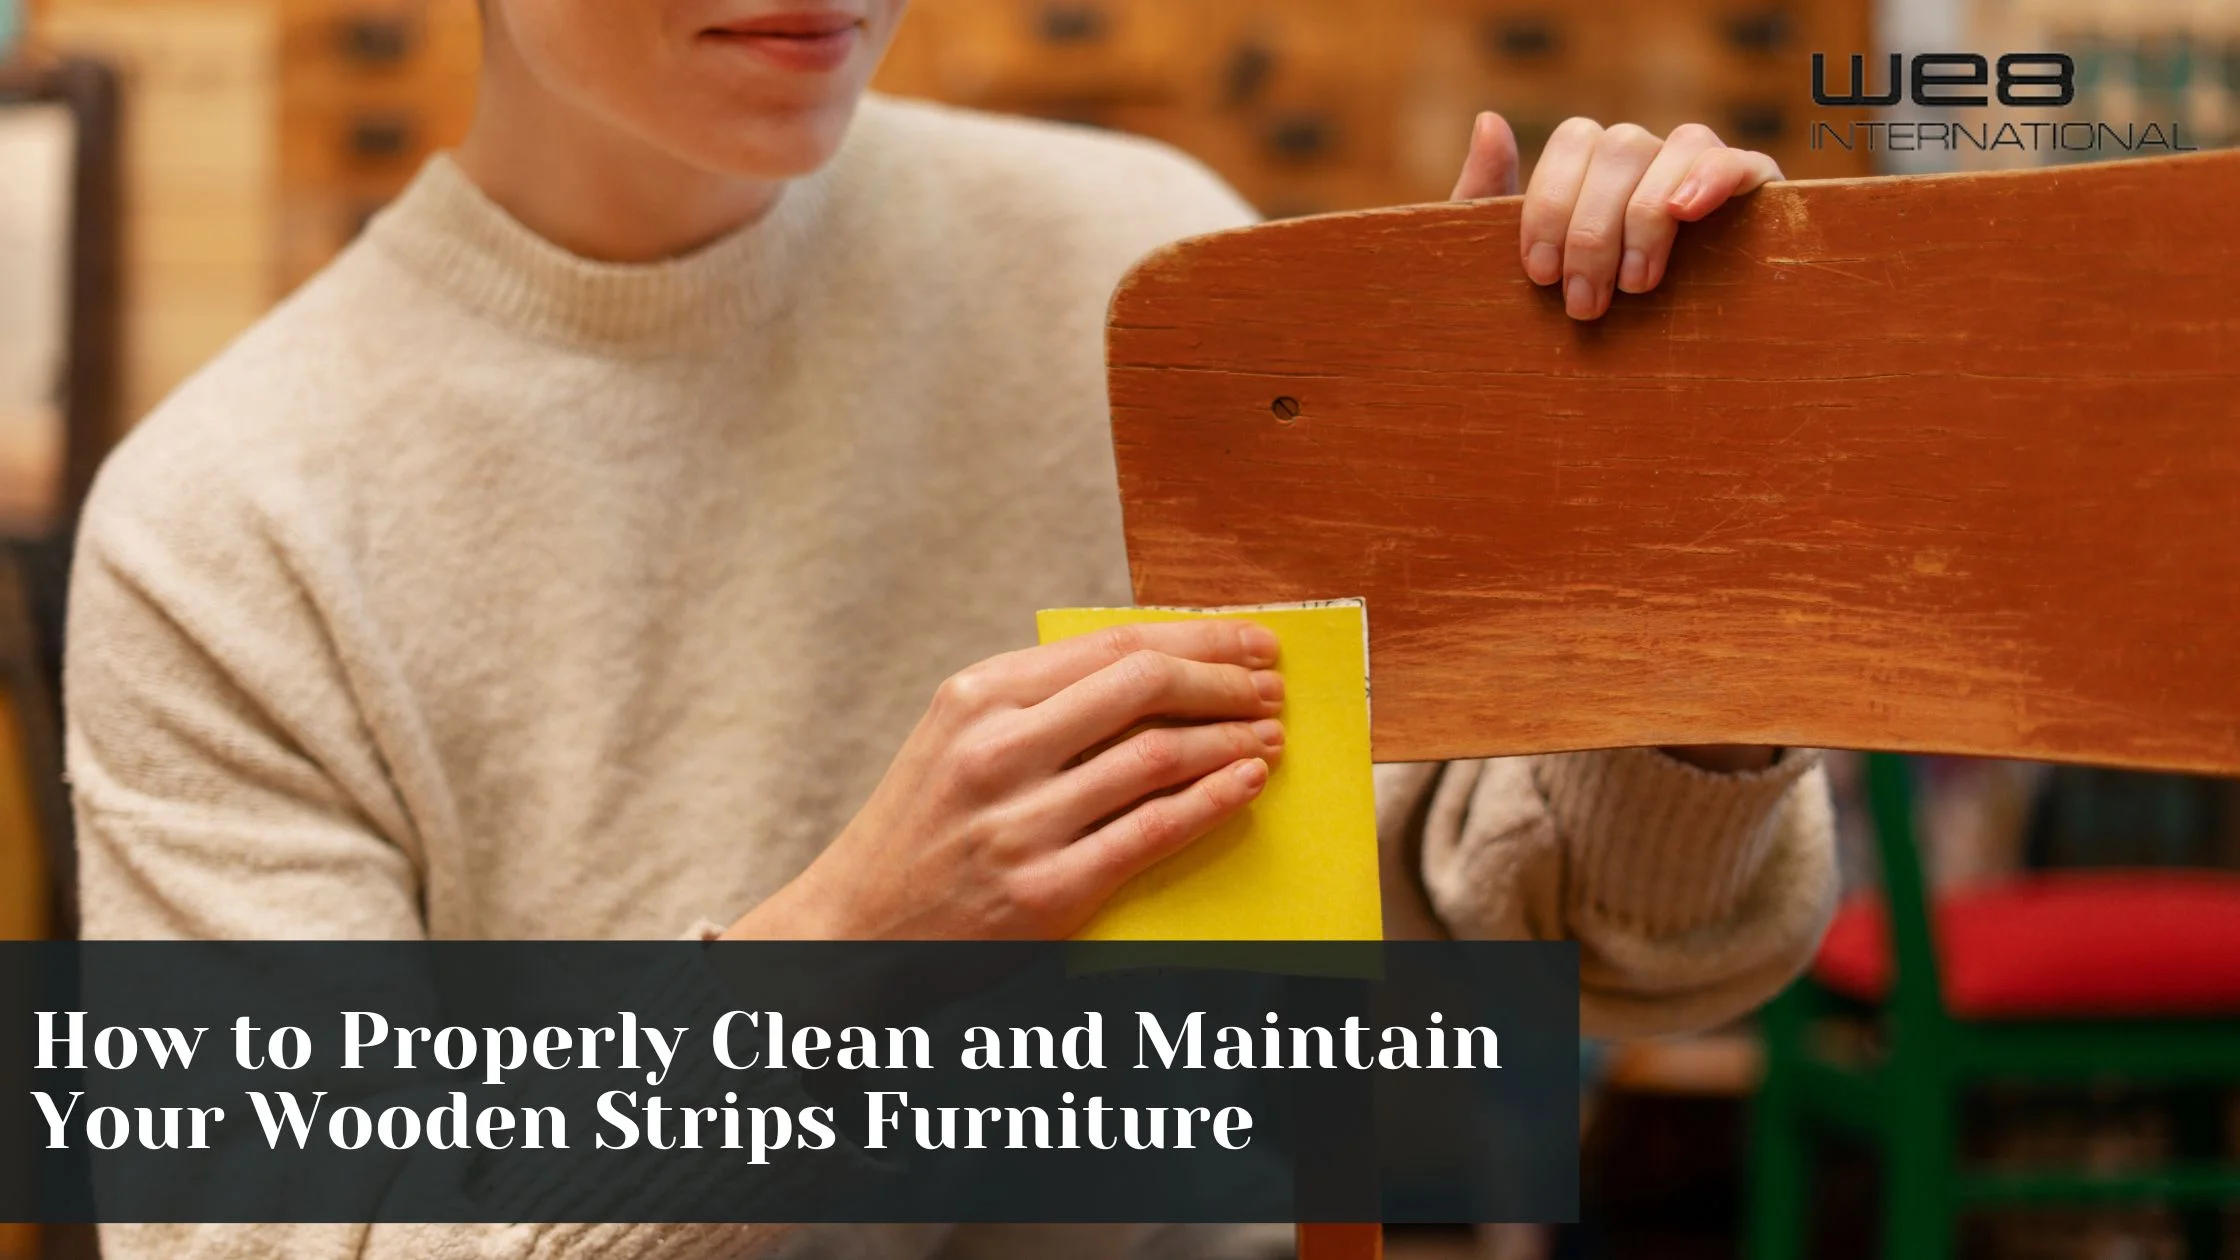 How to Properly Clean and Maintain Your Wooden Strips Furniture